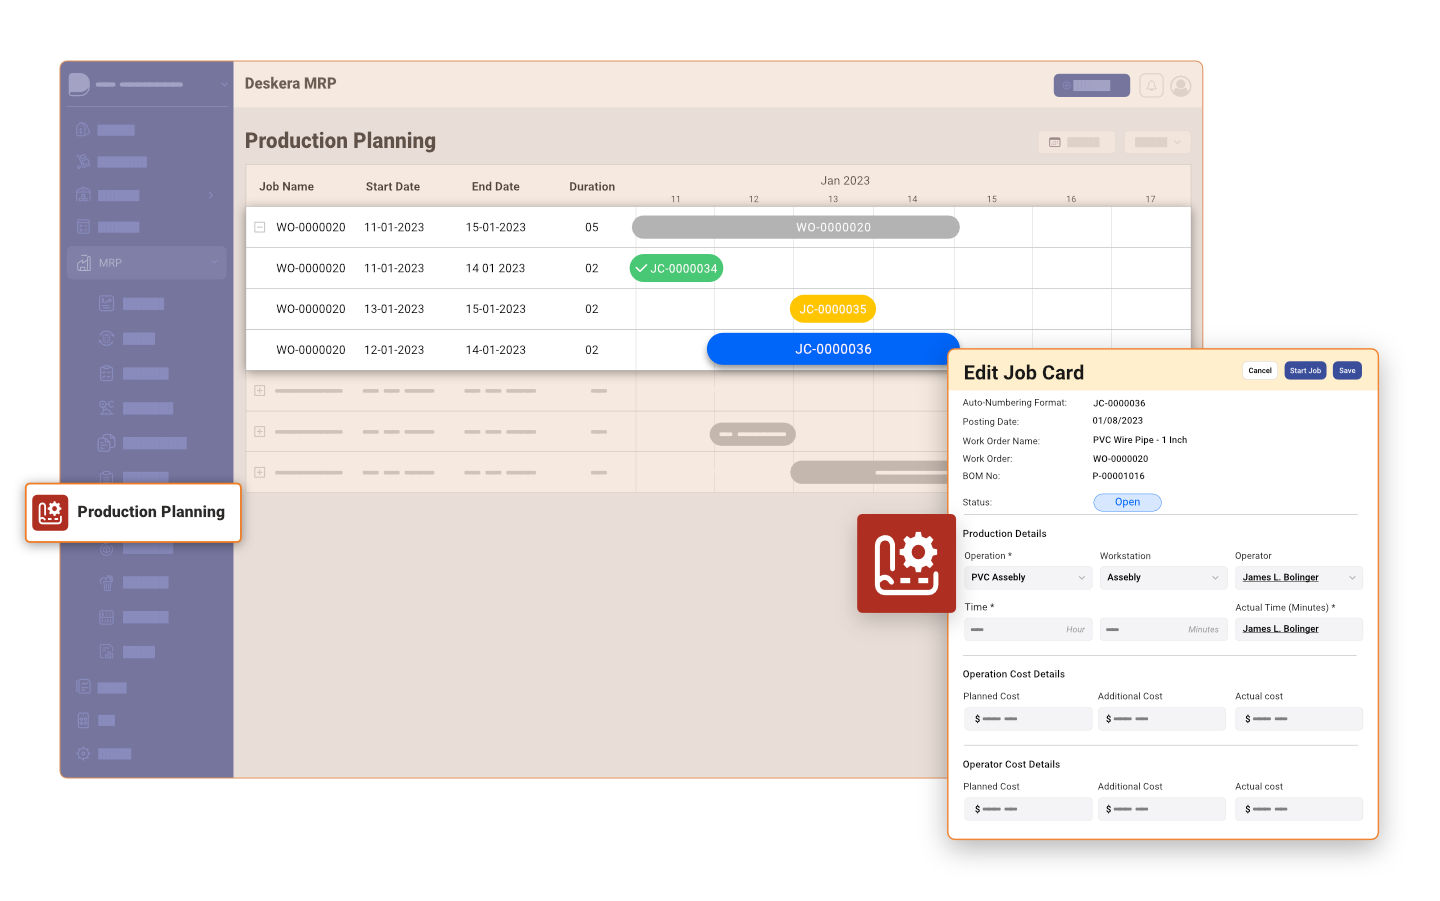 Create production plans with ease. Assign resources, set schedules and deadlines, and manage your entire process in one place. Track production costs and optimize efficiency with comprehensive analytics.